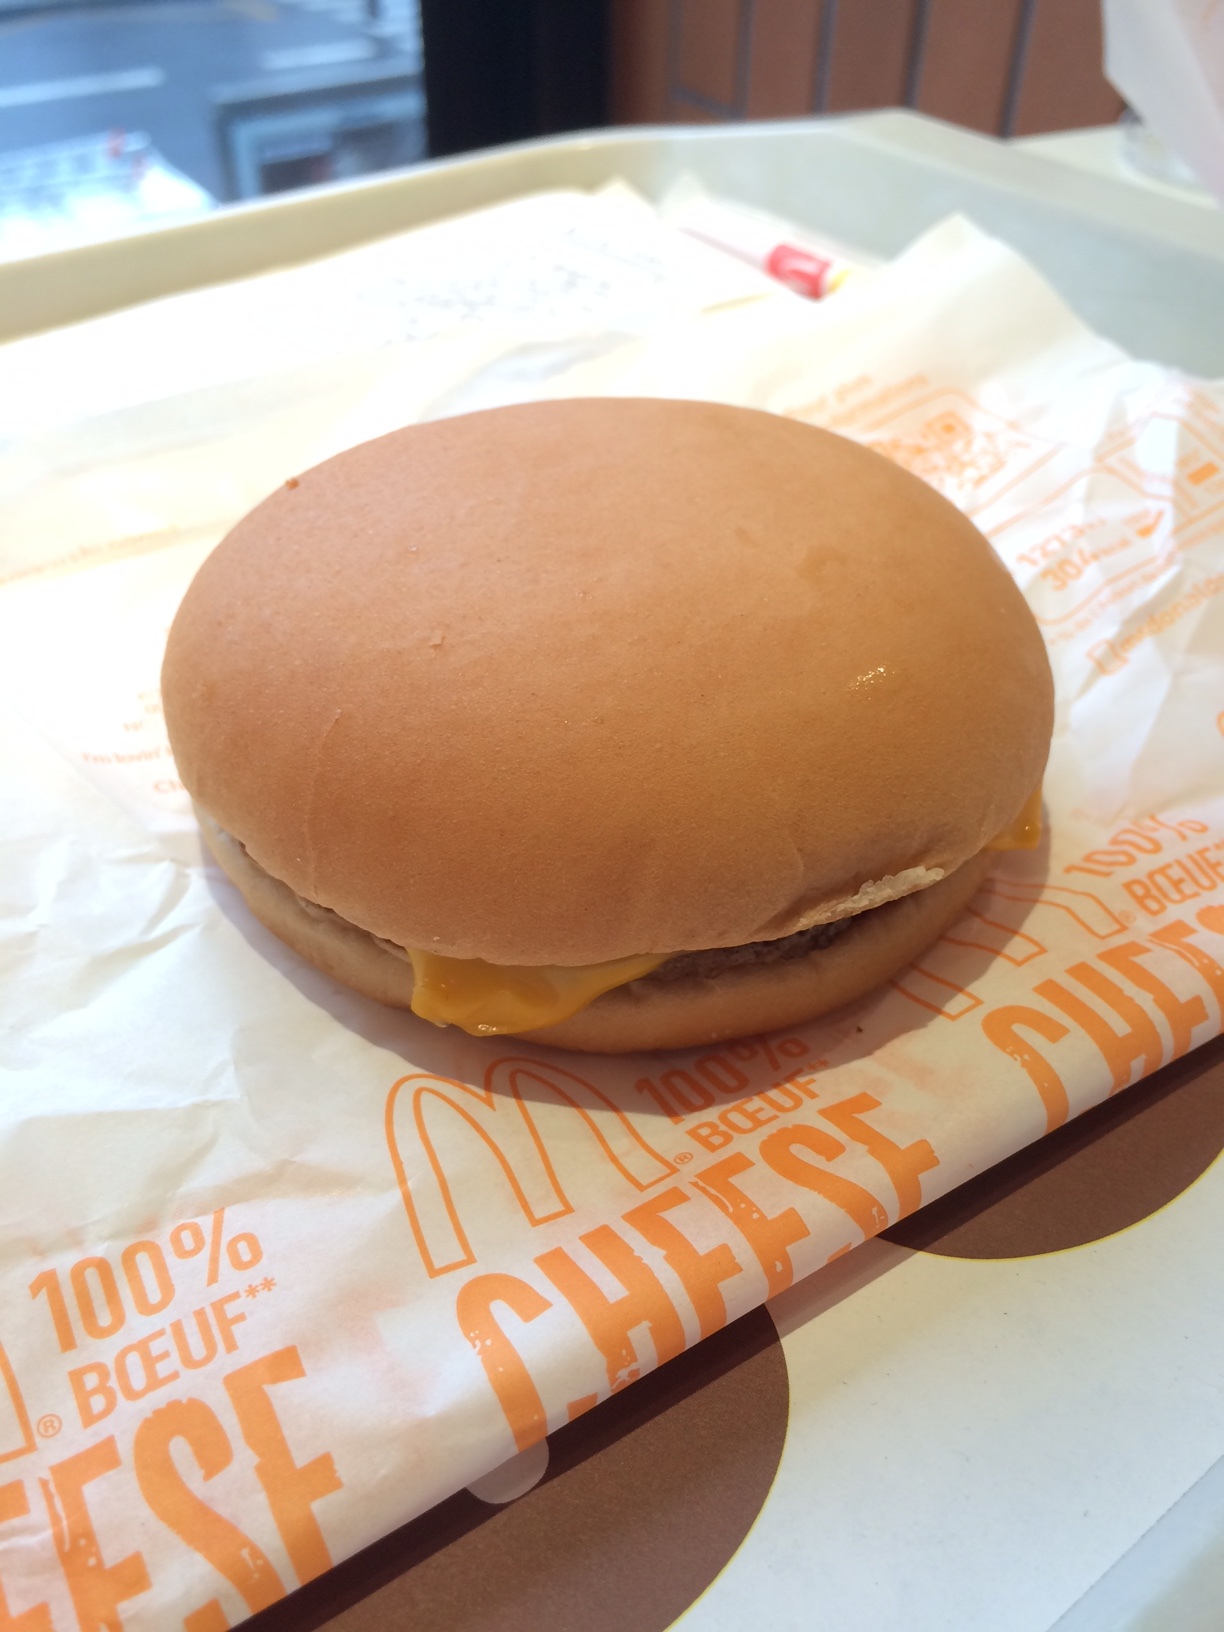  Plenty of macaroons in Provence but this little guy was actually a delicious McDonald's cheeseburger. 